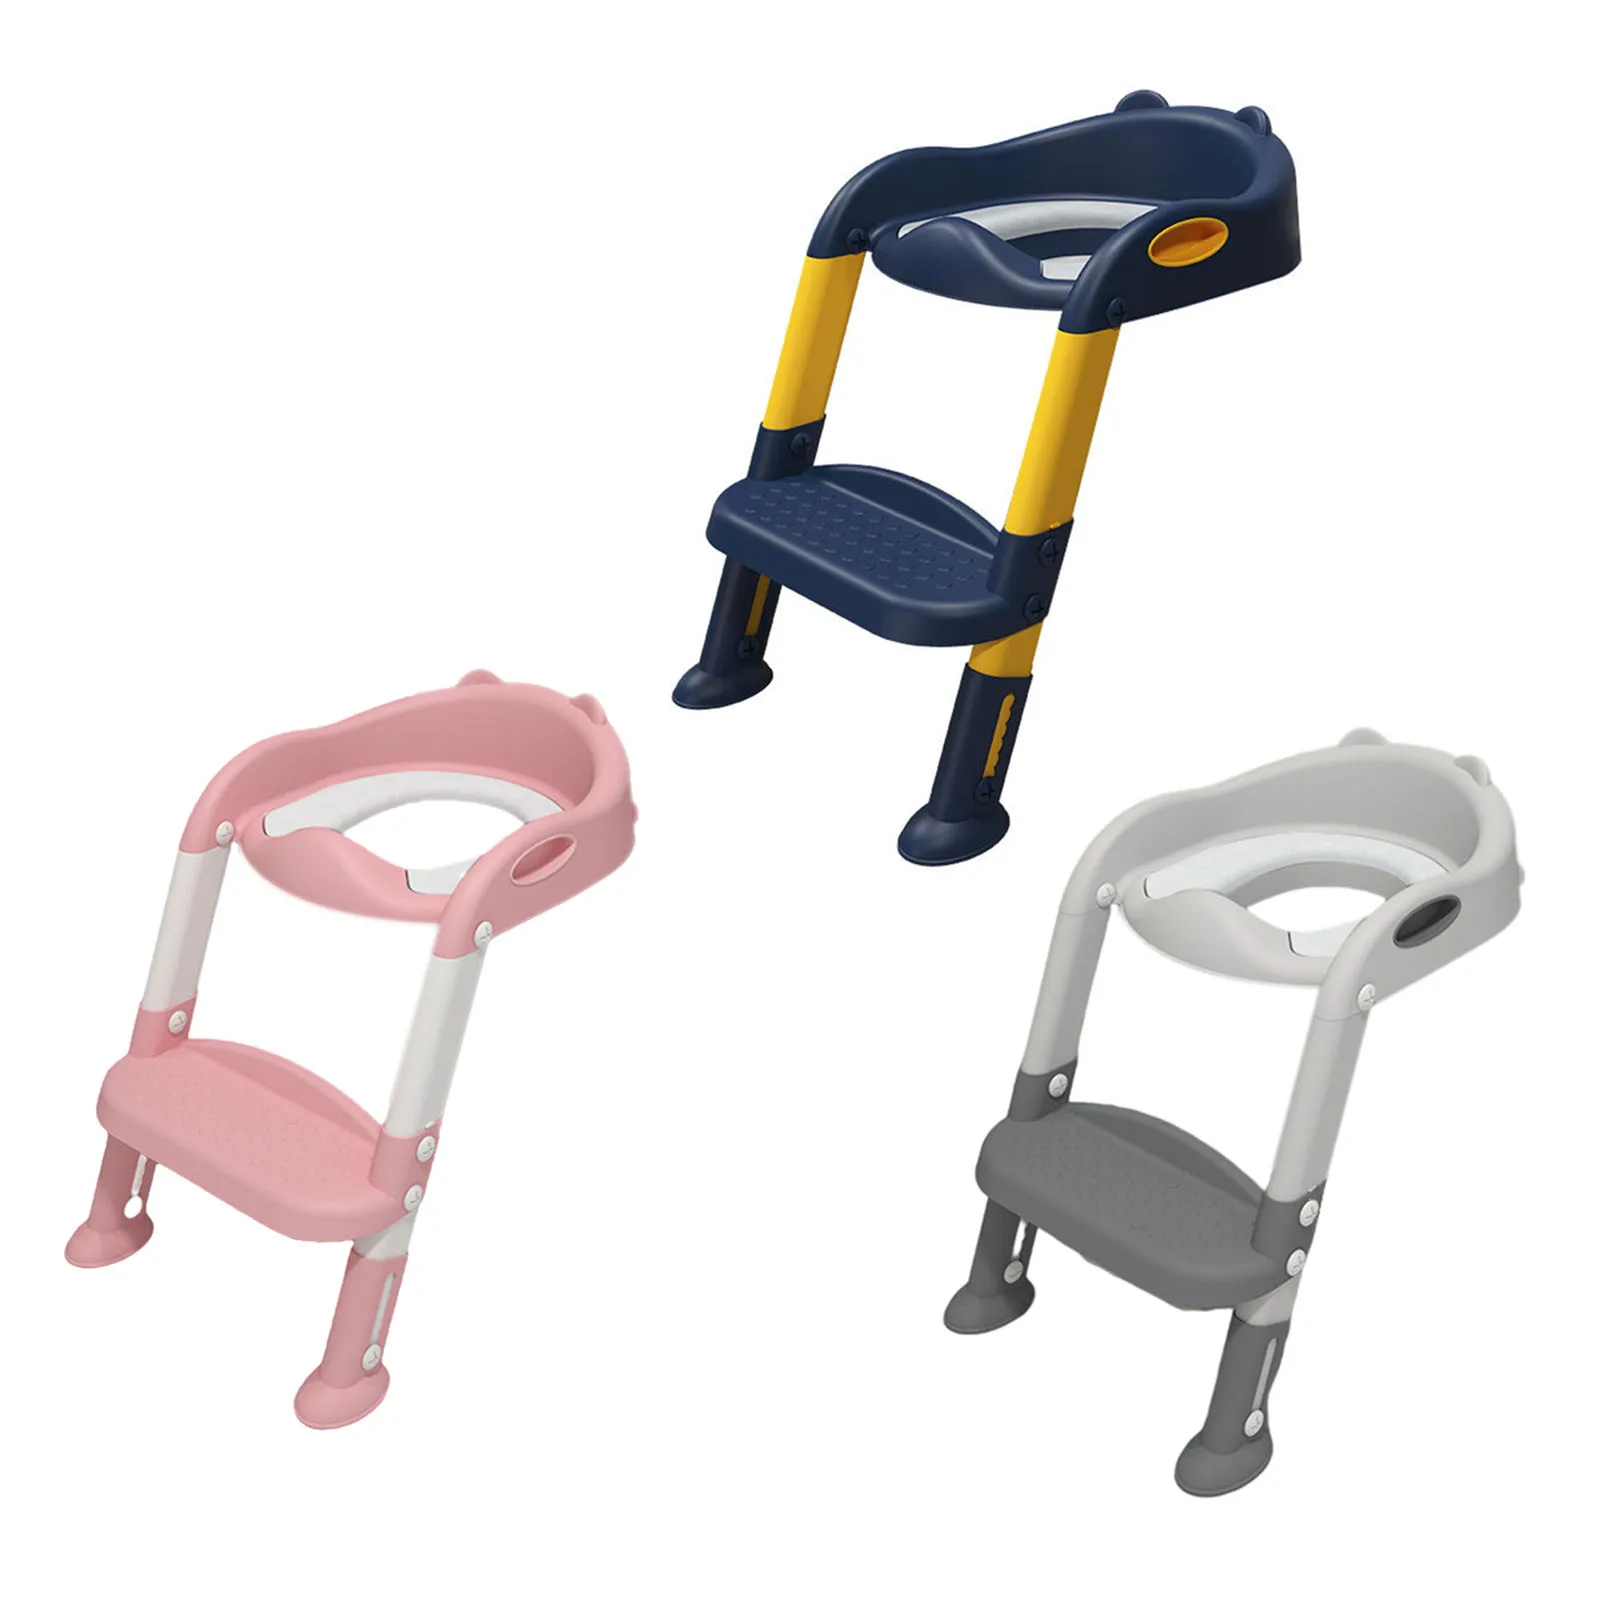 Children Toilet Seat Stool Collapsible Adjustable Step Stool Anti-Slip Comfortable Potty Child Toddlers